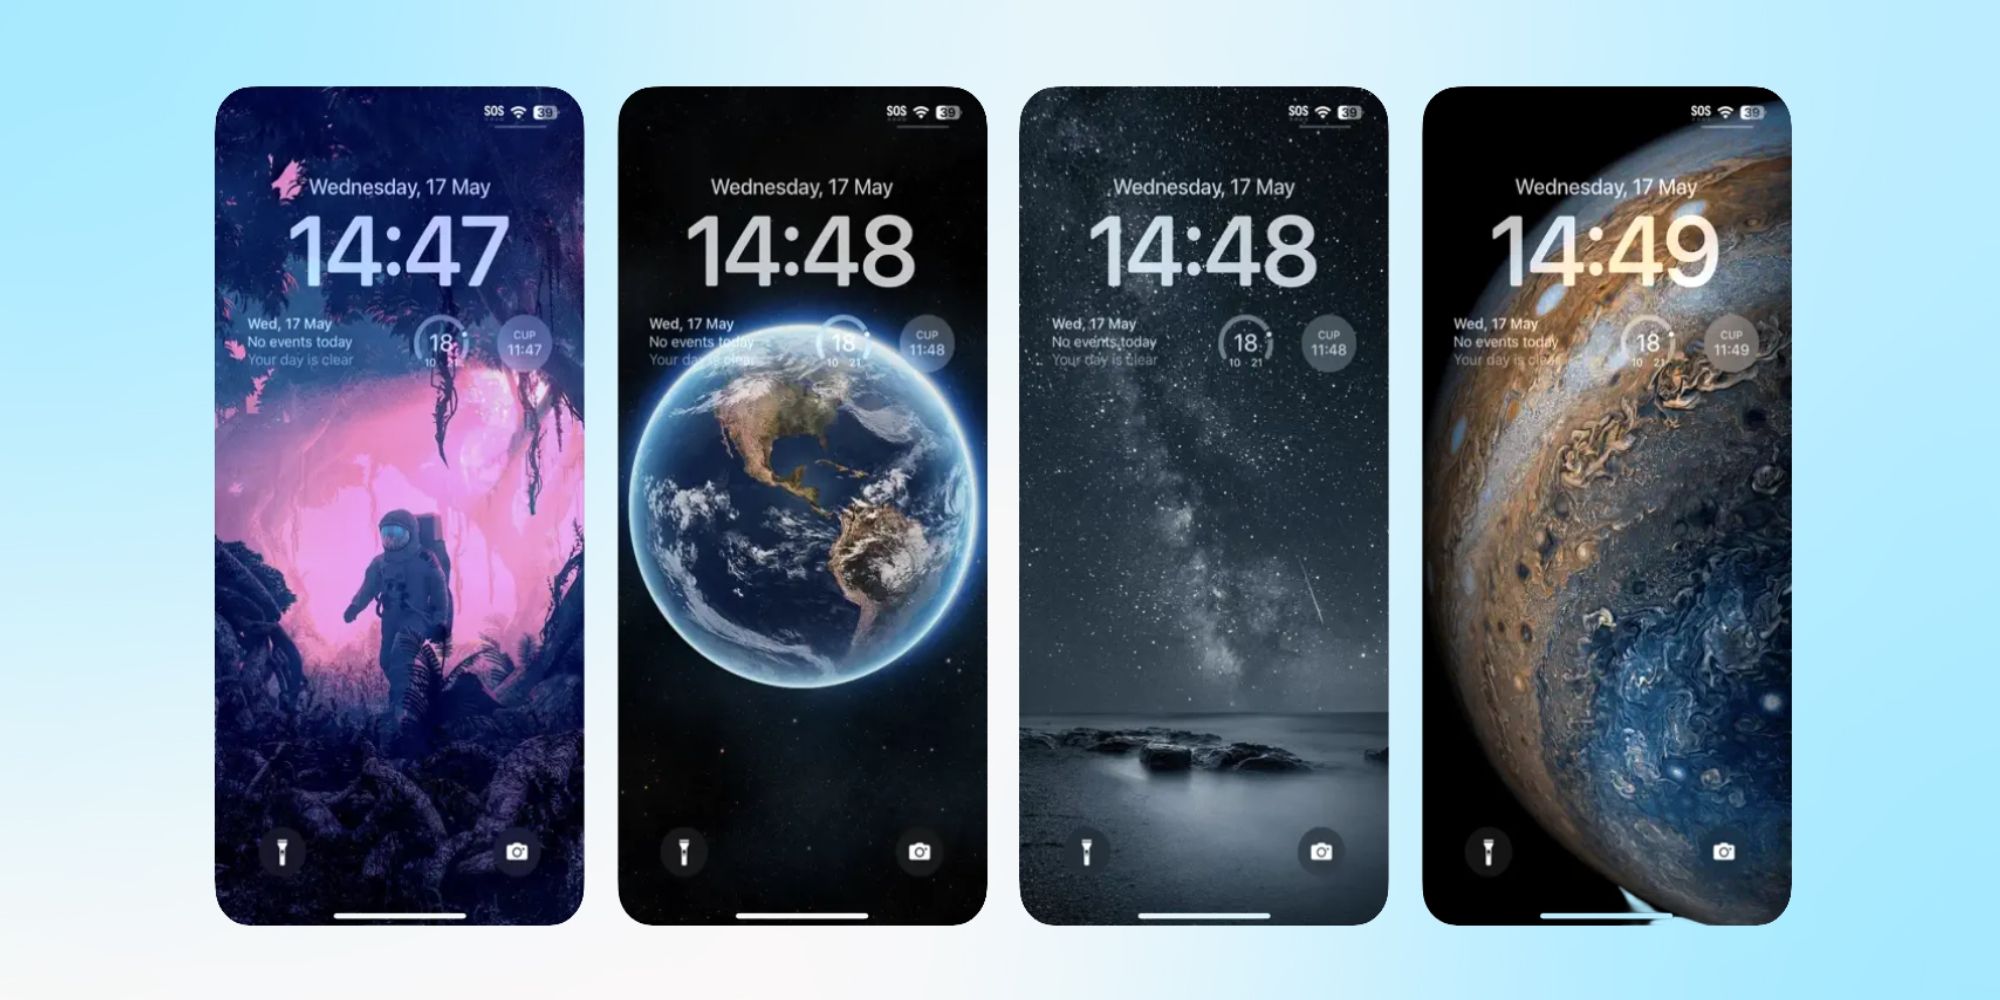 10 Best Free Wallpaper Apps For iPhone In 2023, Ranked